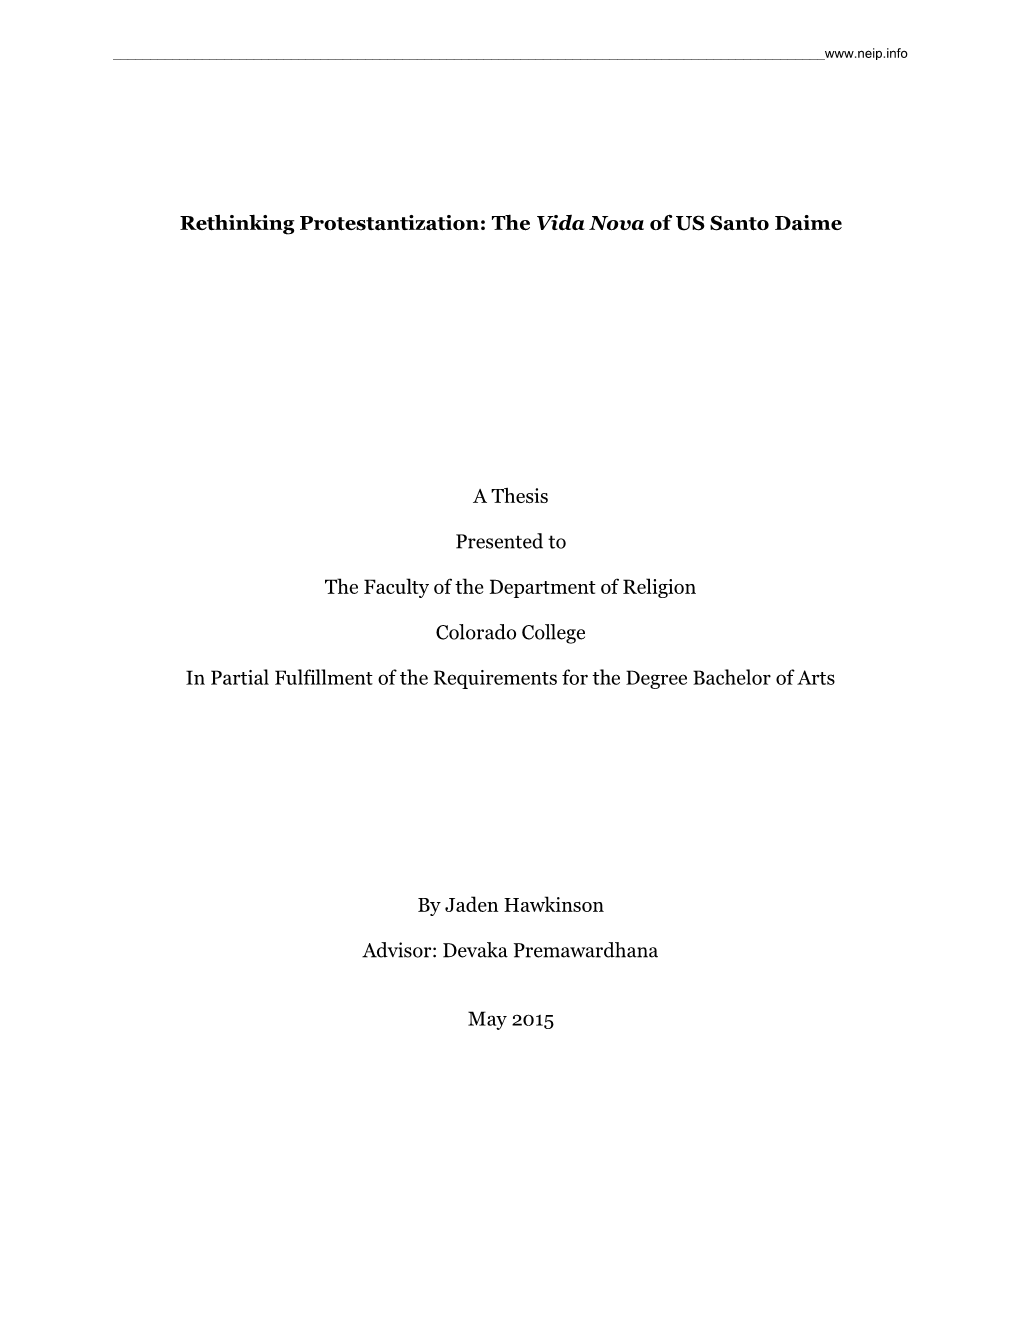 Rethinking Protestantization: the Vida Nova of US Santo Daime a Thesis Presented to the Faculty of the Department of Religion Co